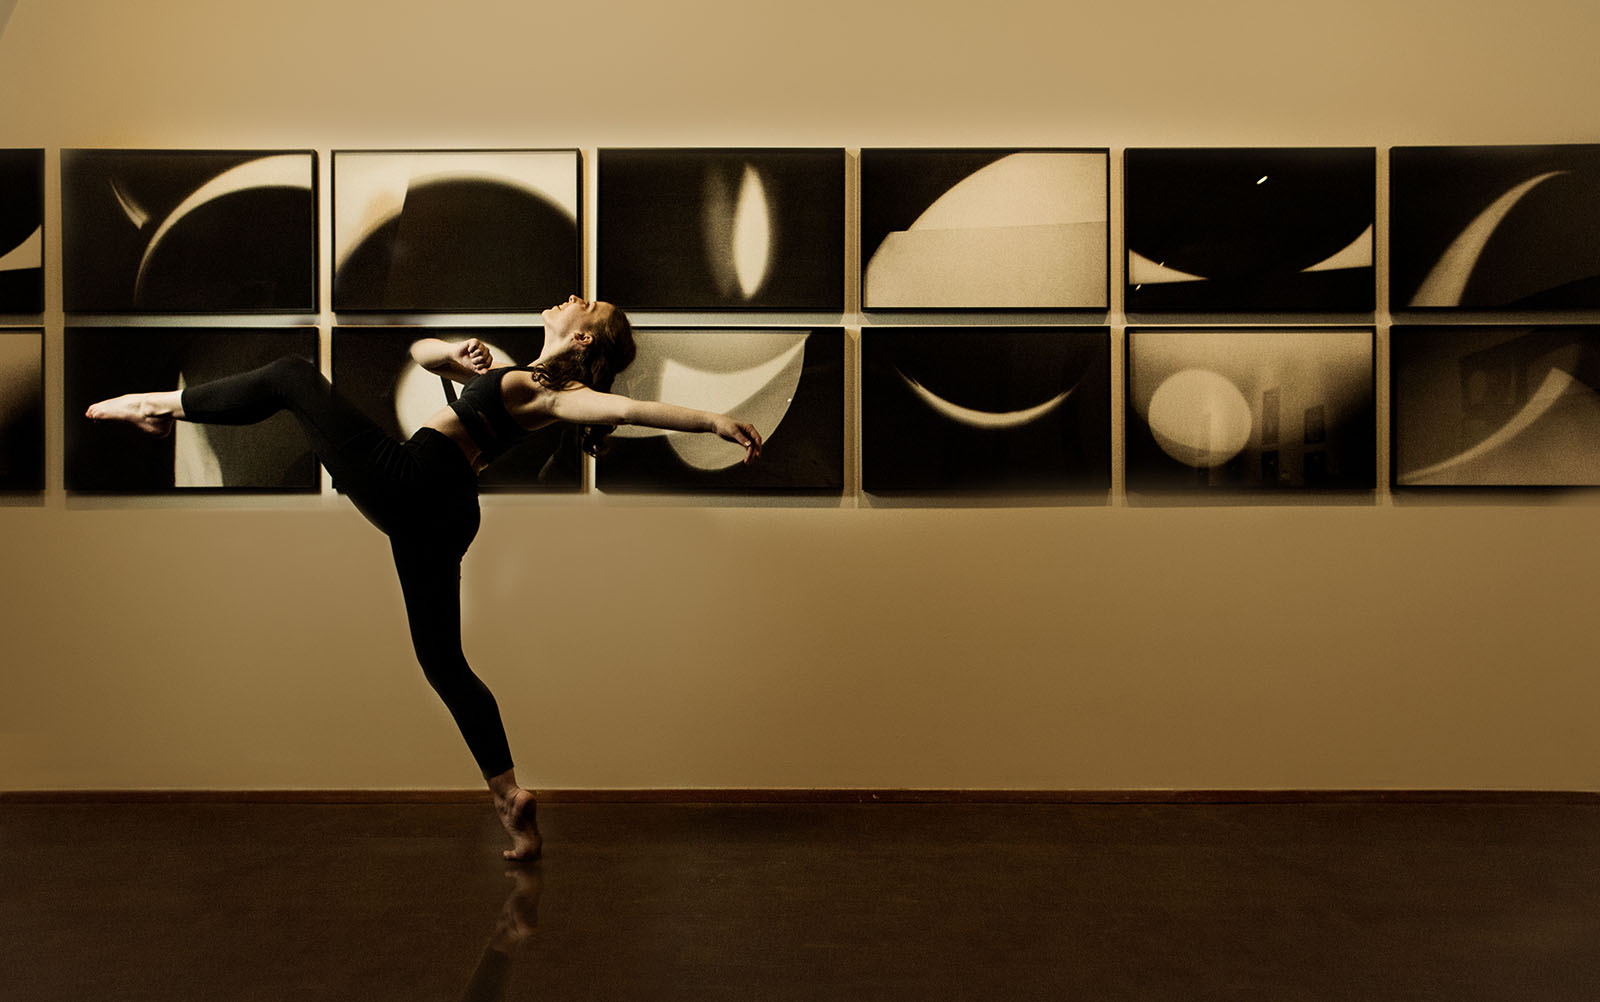 dancer takes an enormous step with back and arm arched back while passing a row of black and white abstract photos